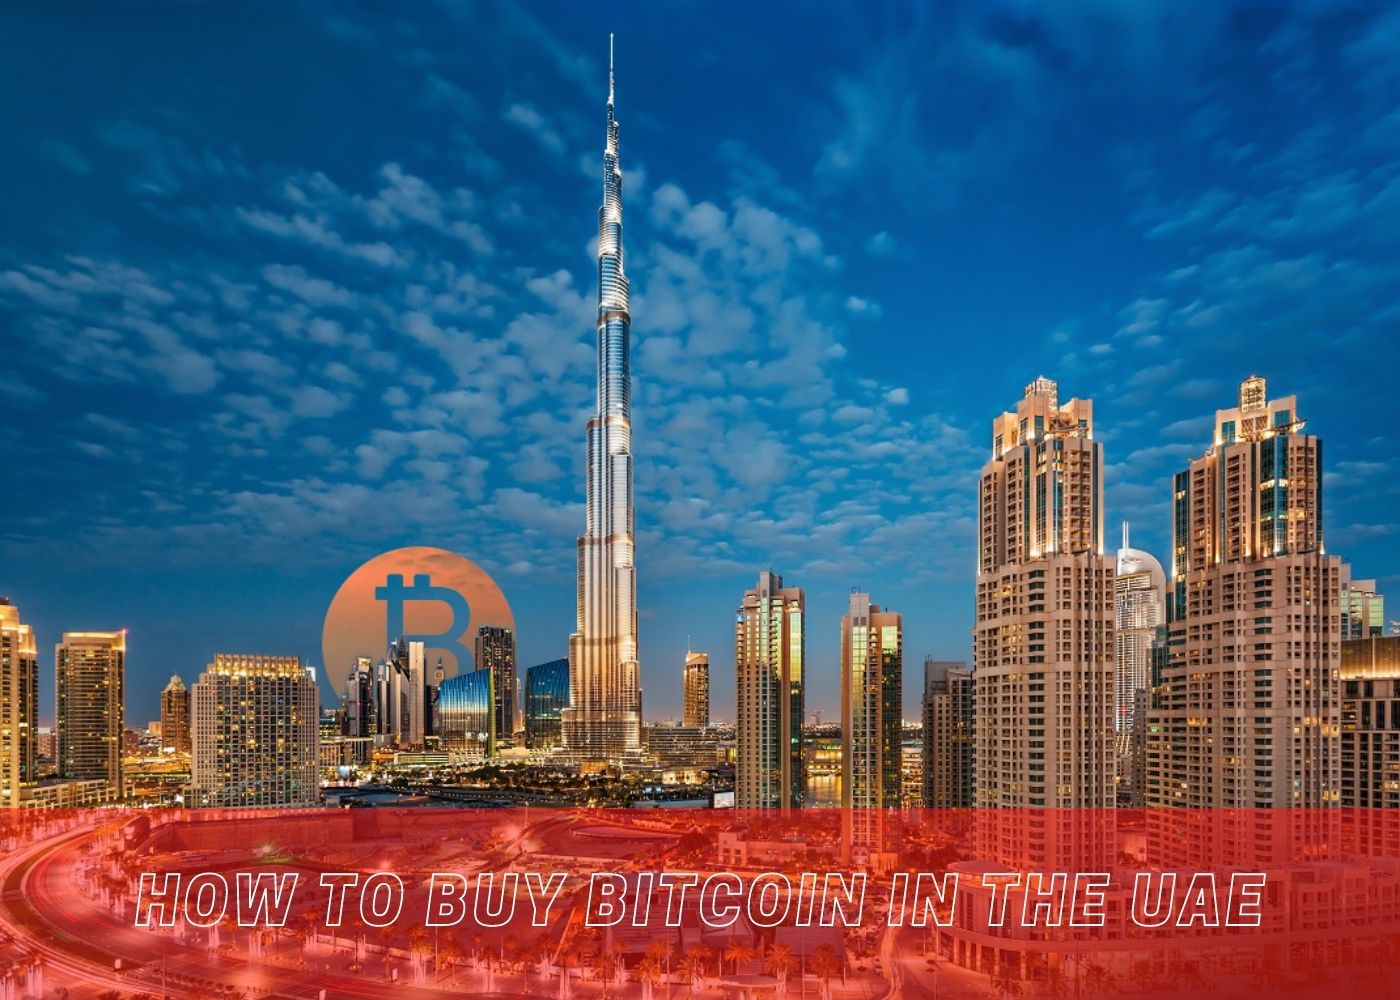 How to buy Bitcoin in the UAE